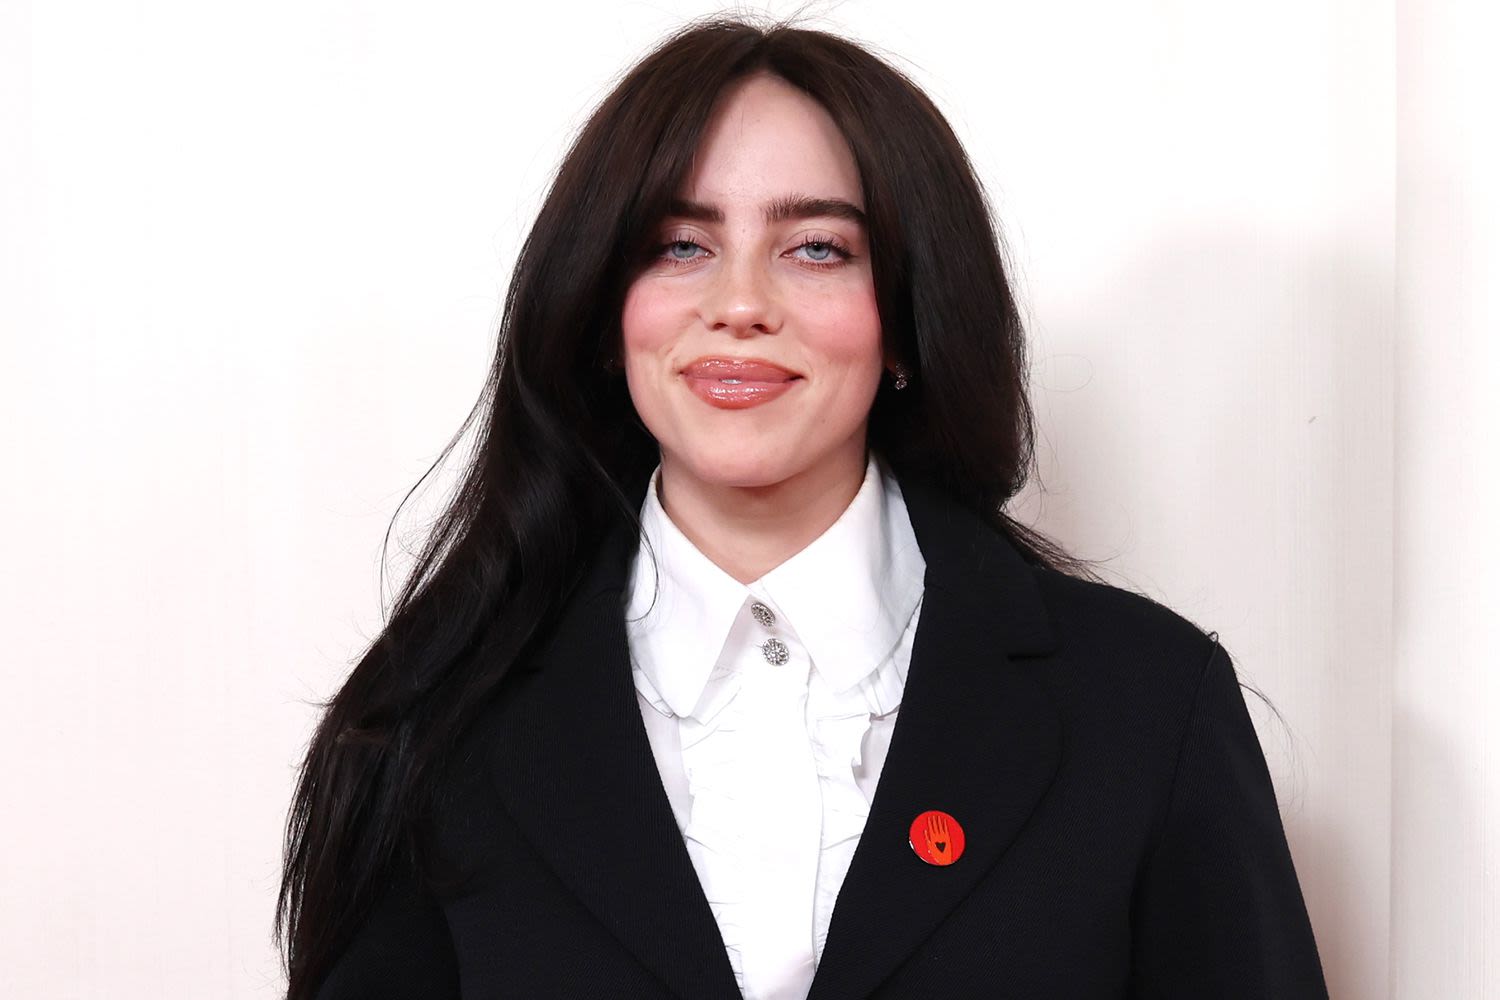 Billie Eilish compliments Chicken Shop Date host's boobs mid-interview: 'They're nice'